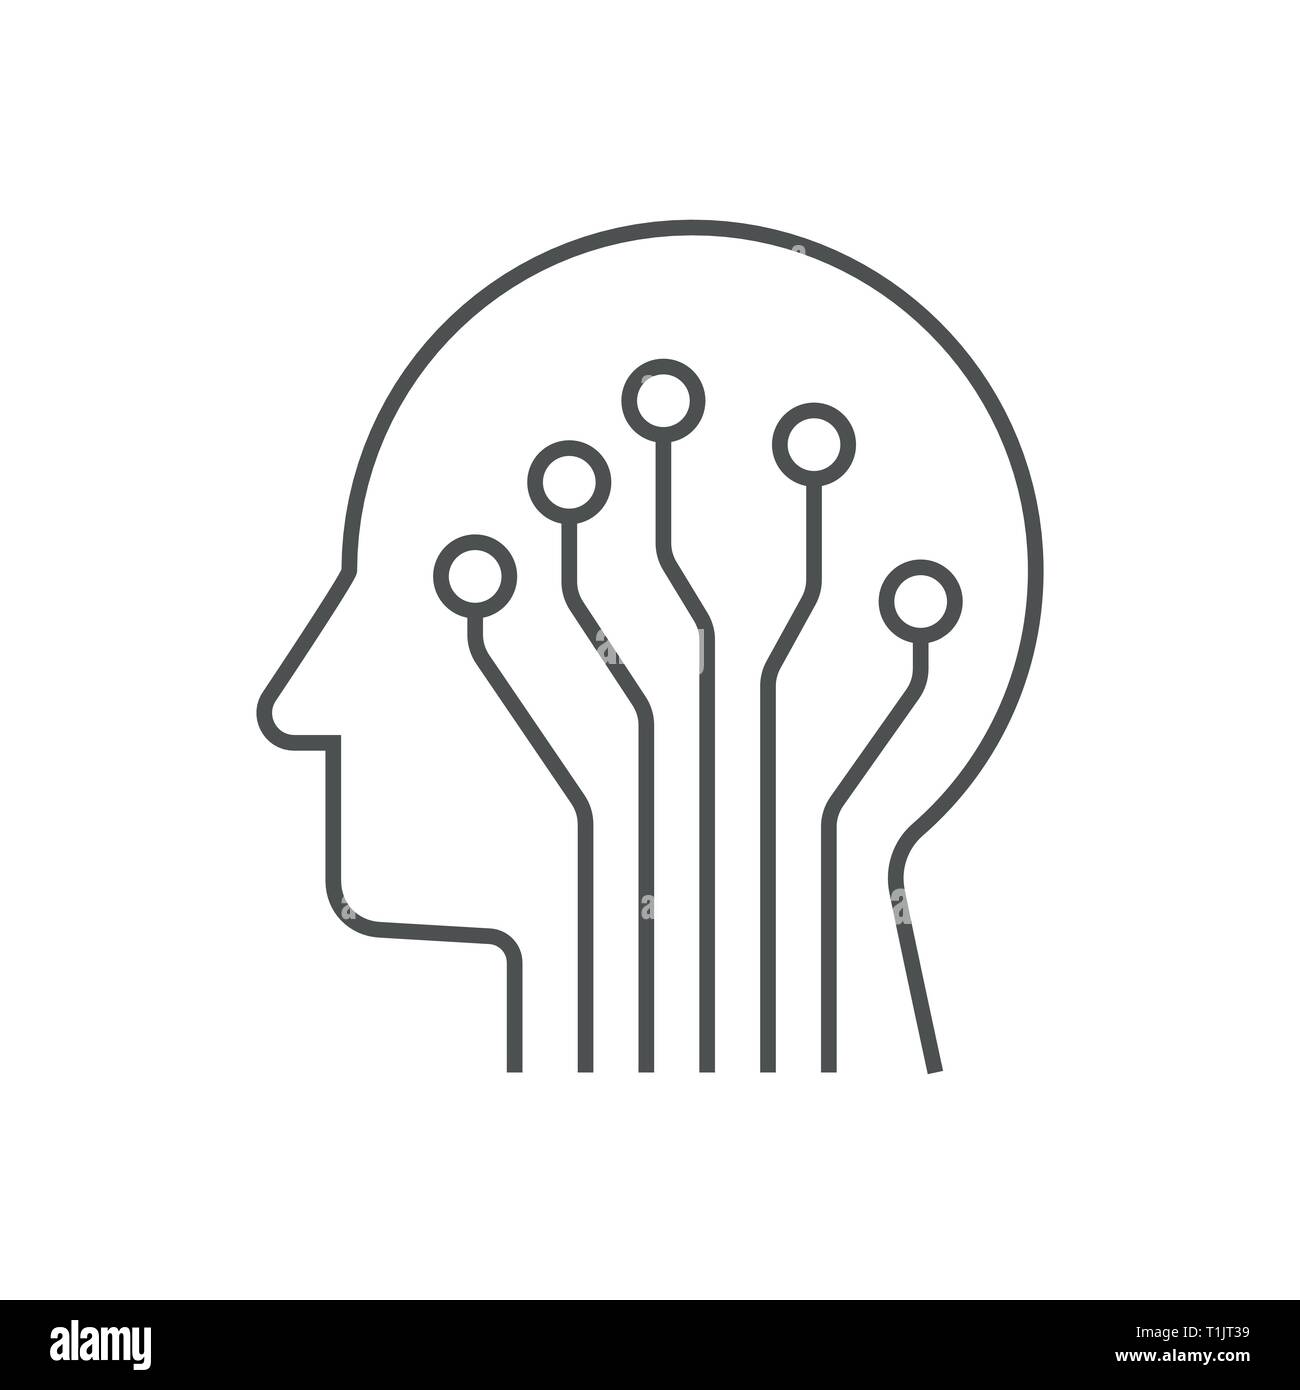 Ai - Artificial intelligence concept. Face outline made of circuit line. Stock Vector